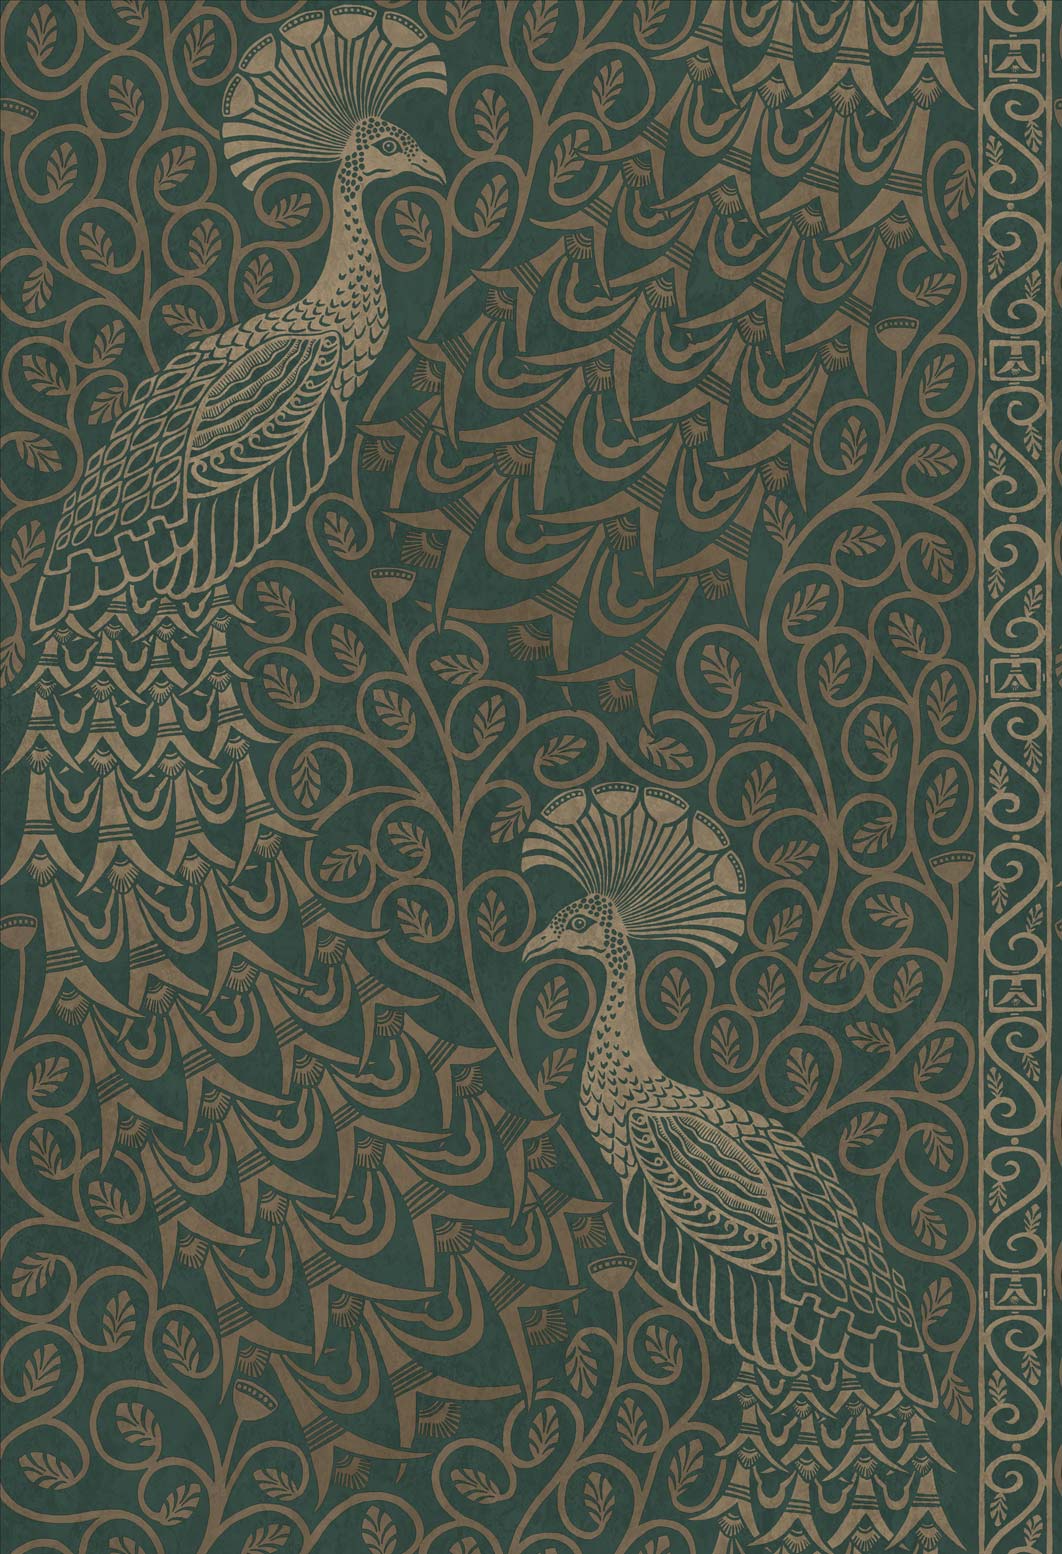 Wallpaper - Cole and Son - Pearwood - Pavo Parade - Metallic Gilver on Racing Car Green